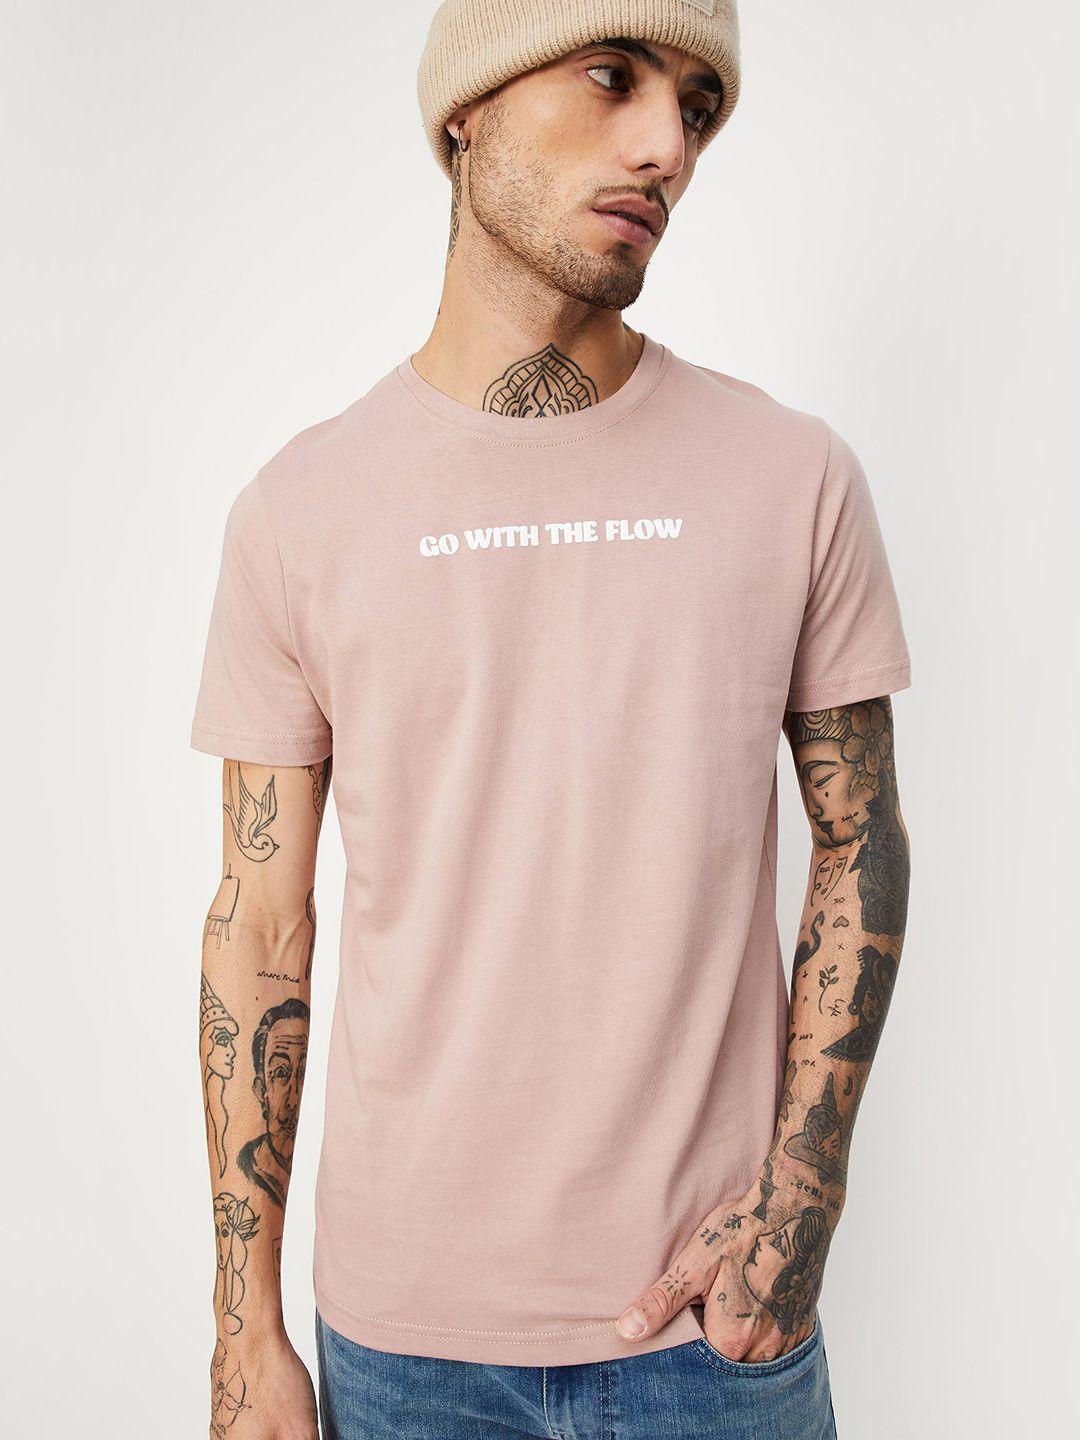 max-typography-printed-round-neck-pure-cotton-t-shirt